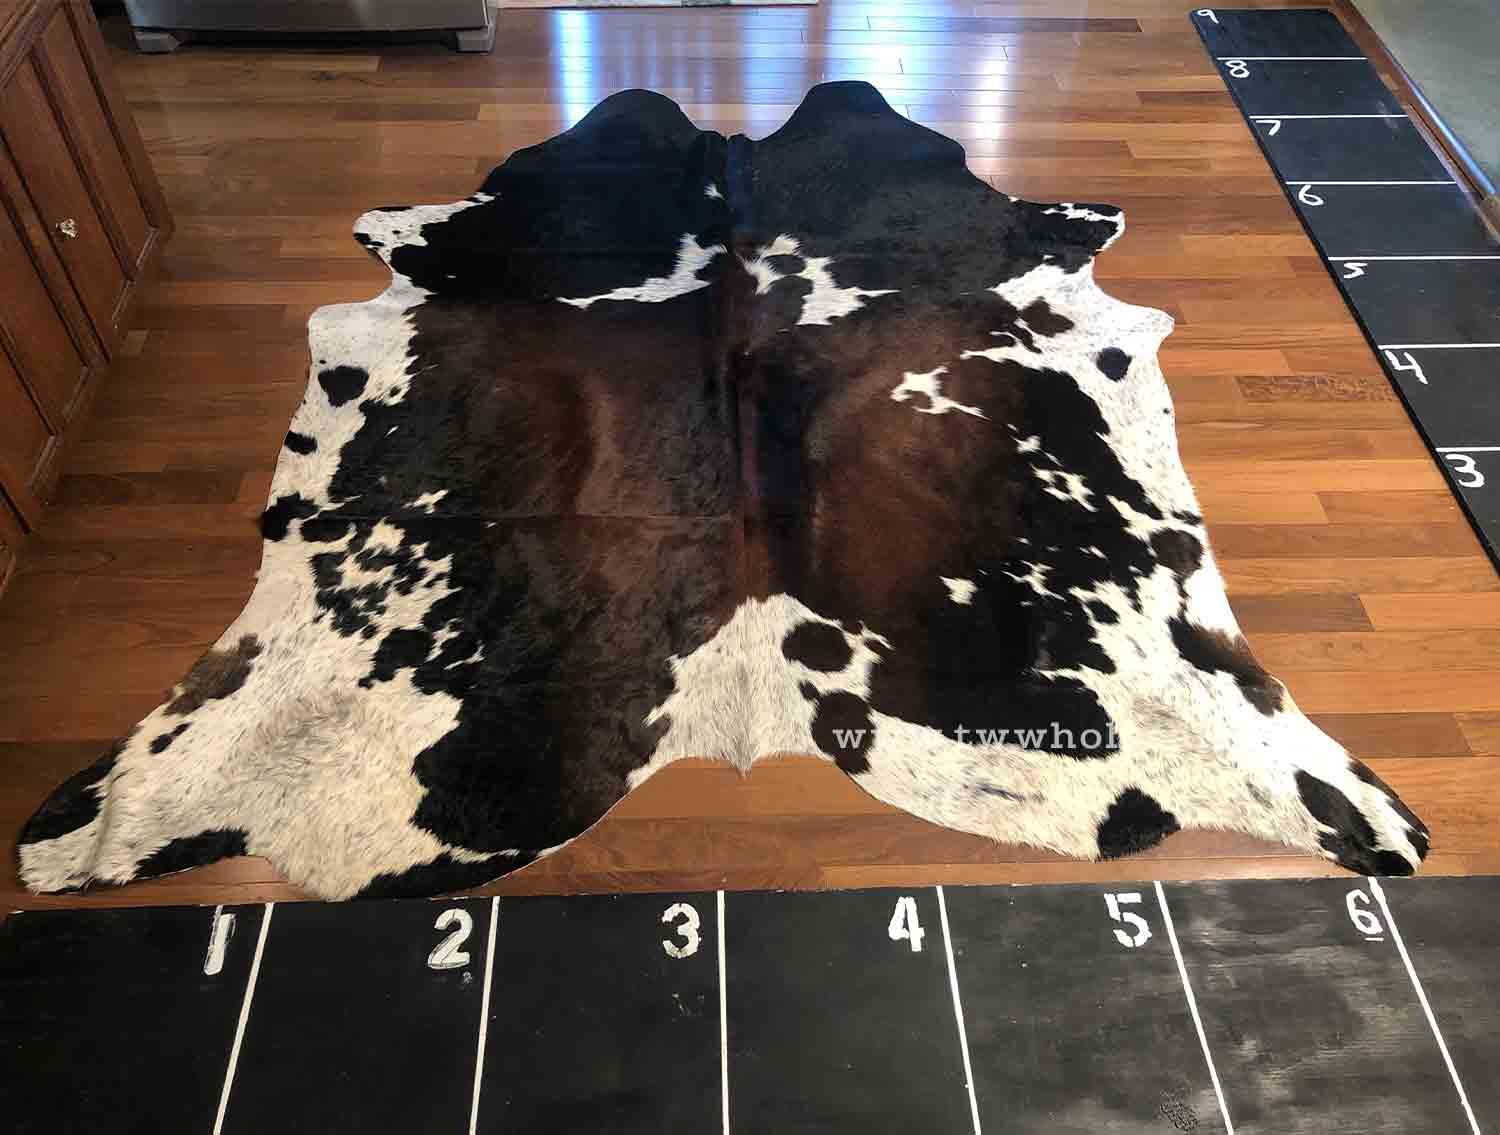 Details about   New Brazilian Cowhide Rug Leather TRICOLOR BLACK AND WHITE REDDISH 5'x7' Hide 